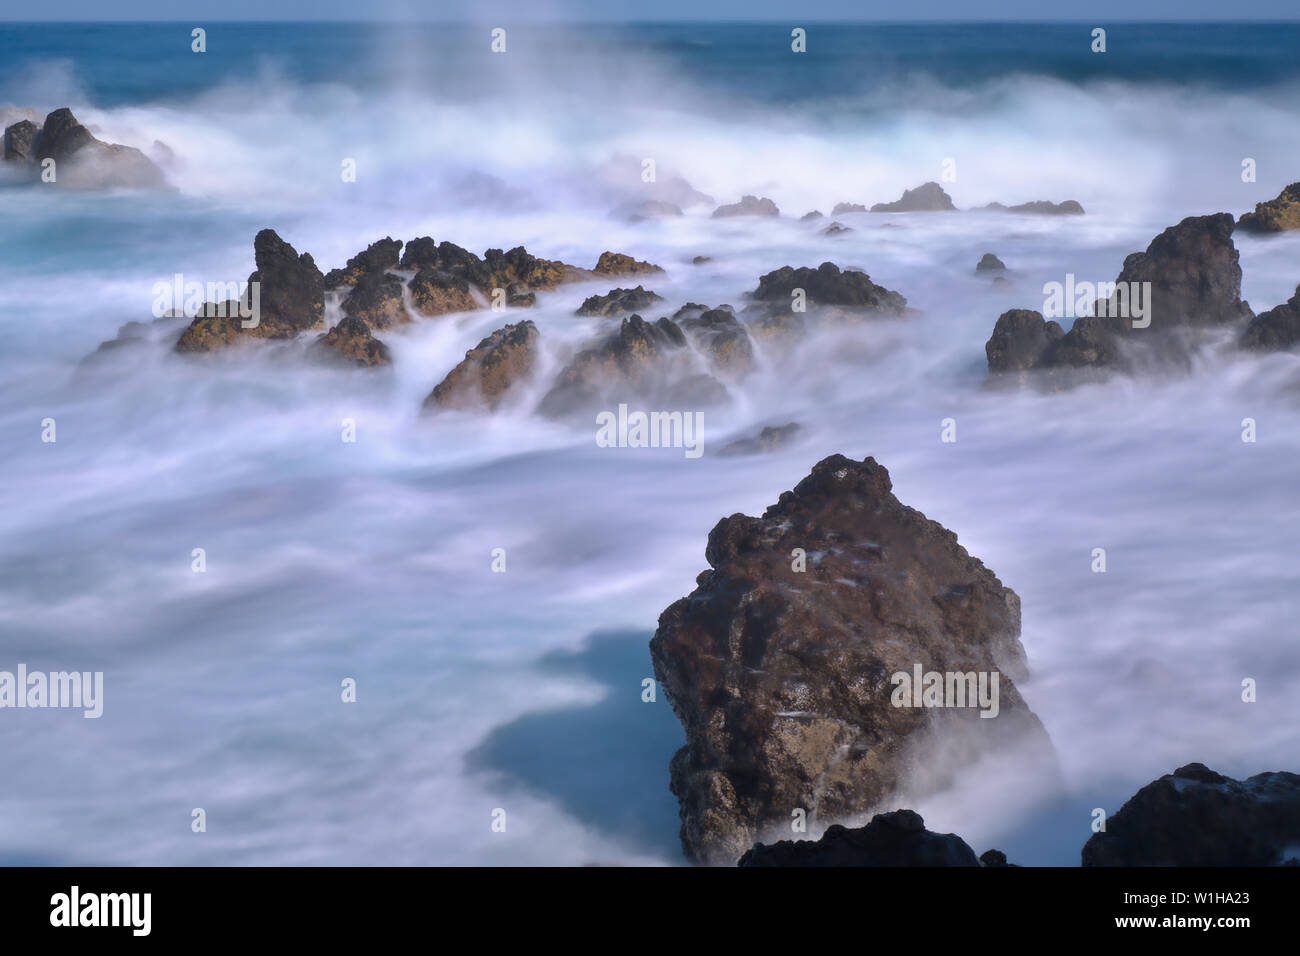 Excerpt from the Atlantic Ocean on teneriffa with waves and spray over black lava stones. Long exposure photography with ND filter, the water is misty Stock Photo